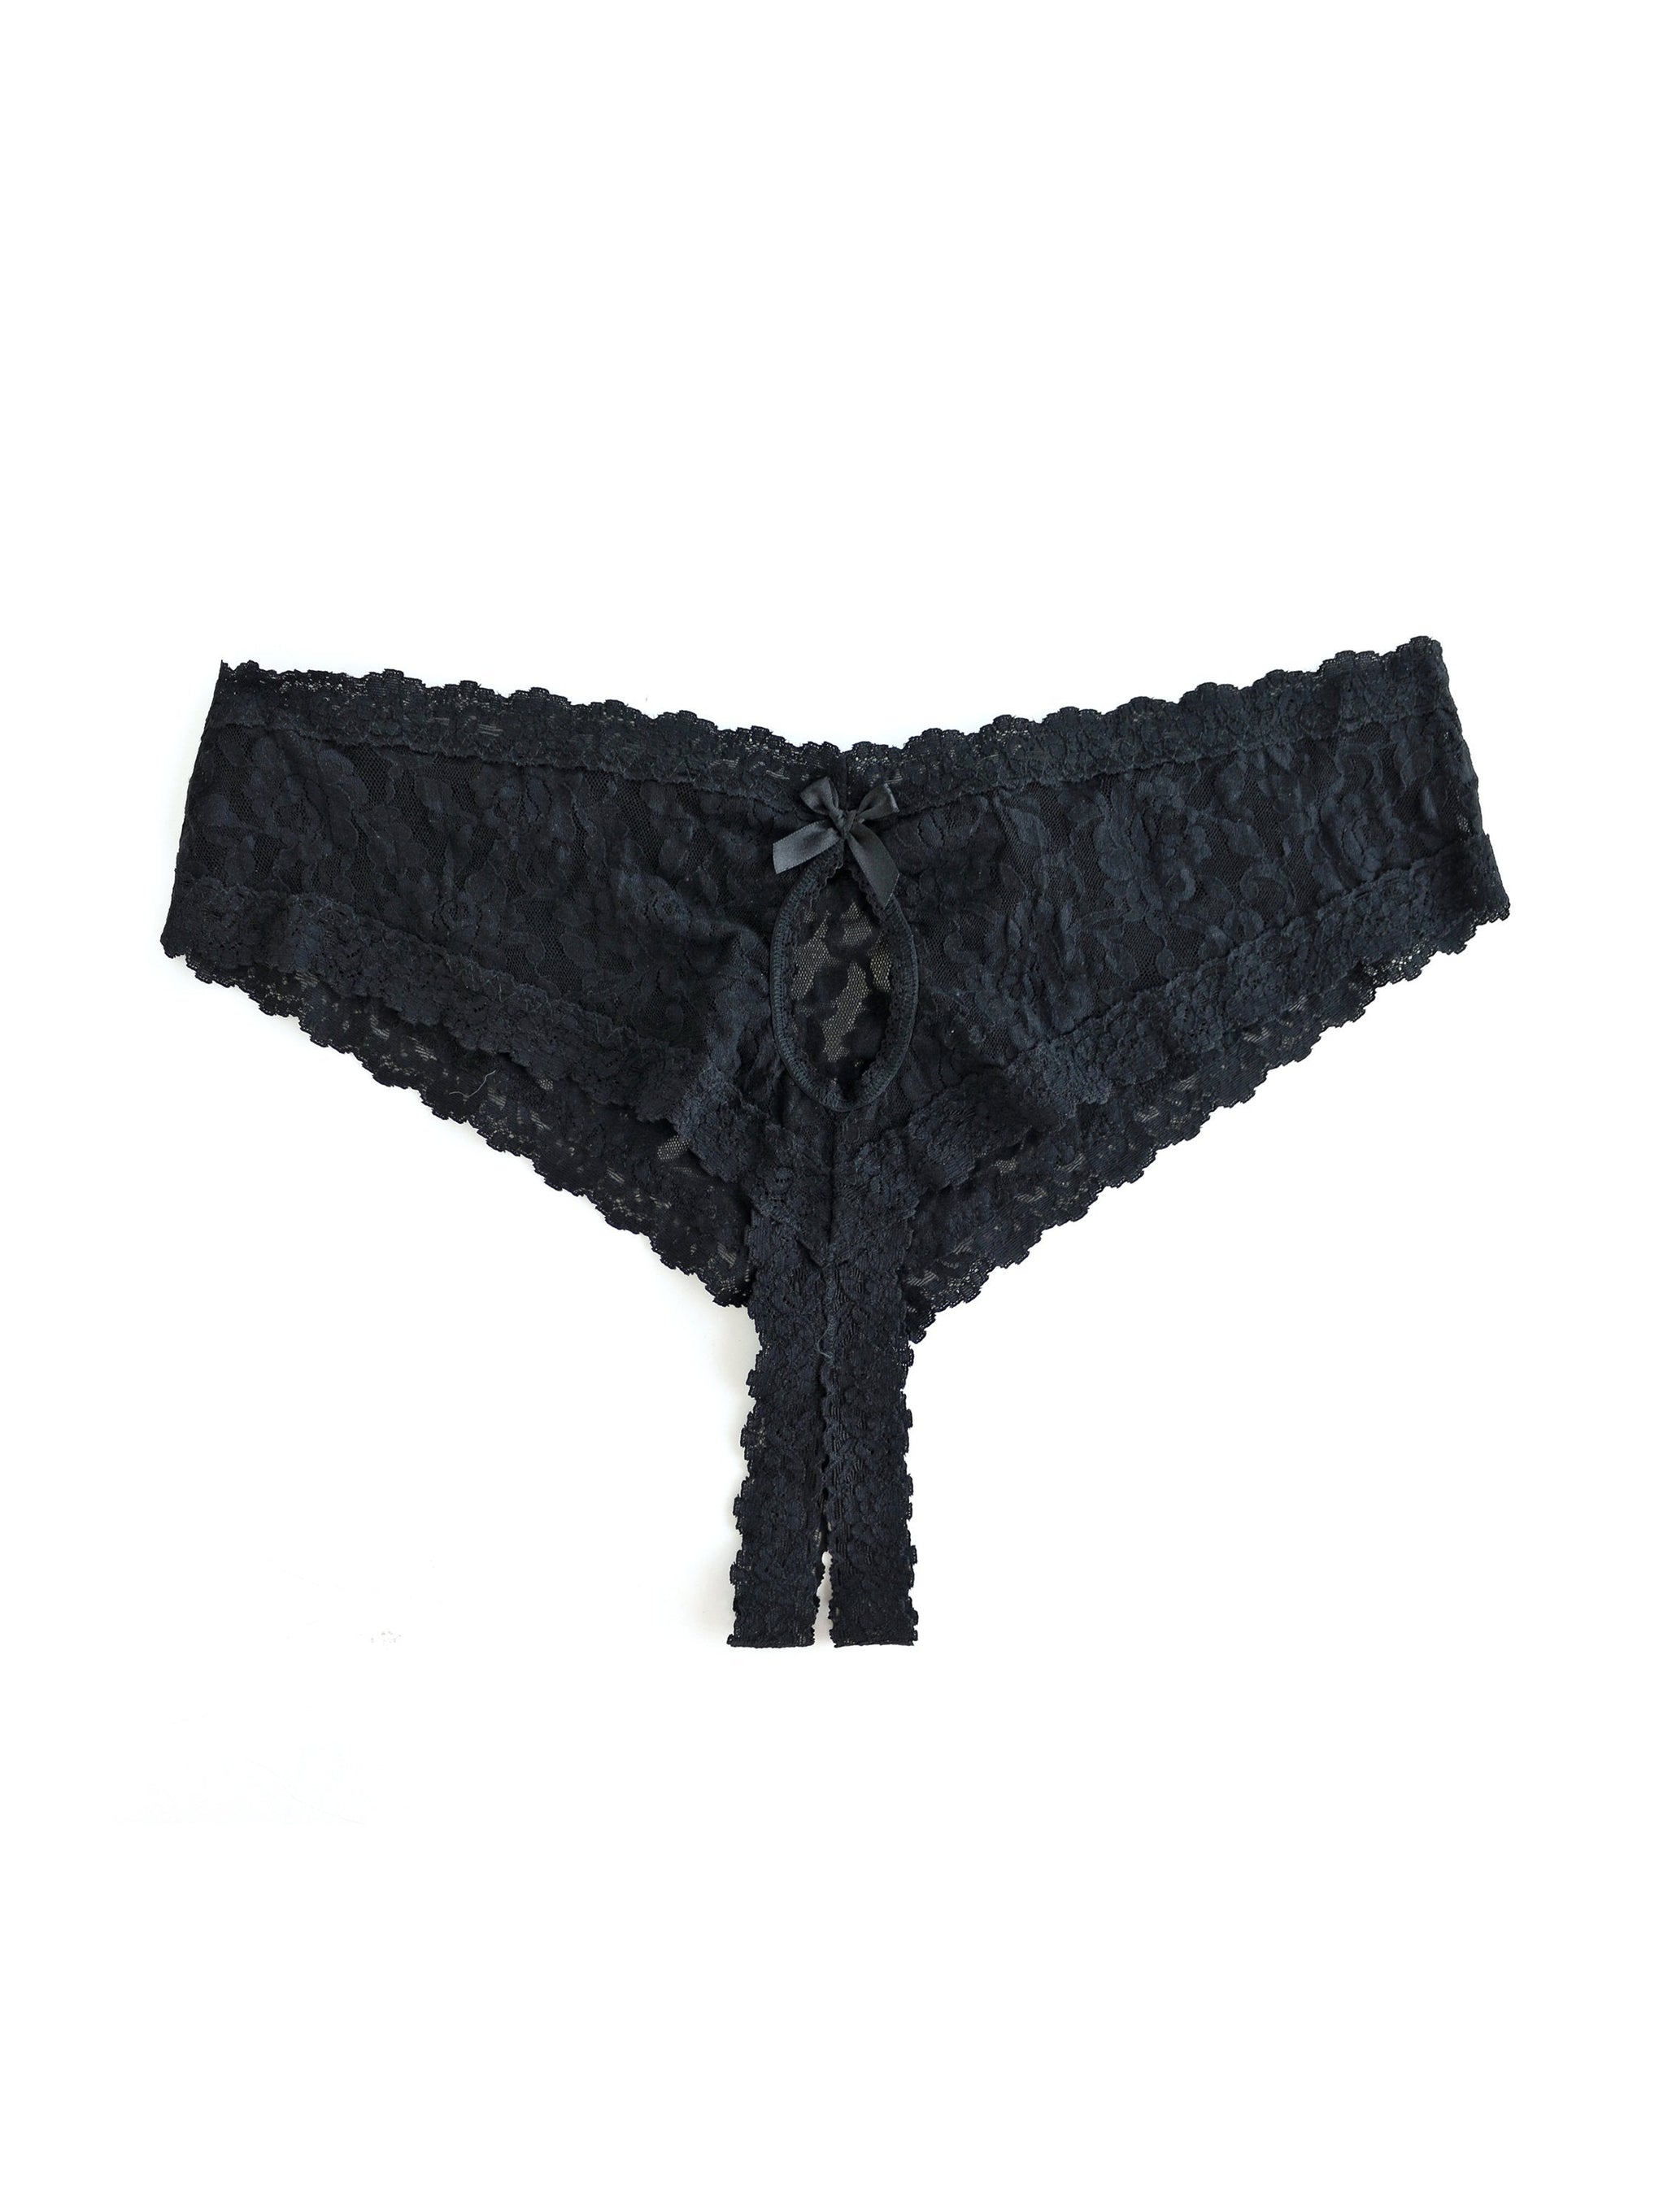 Plus Size Signature Lace Crotchless Cheeky Hipster